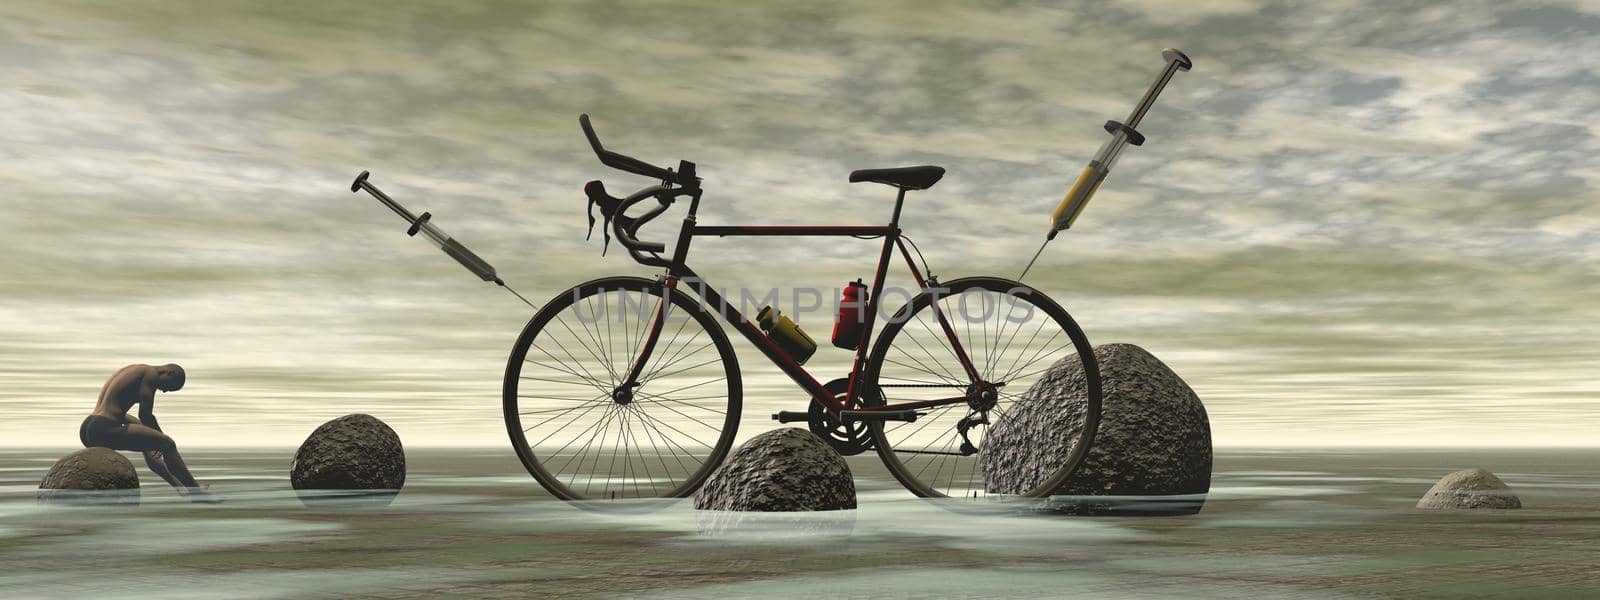 Effects of doping in sport - 3d rendering by mariephotos